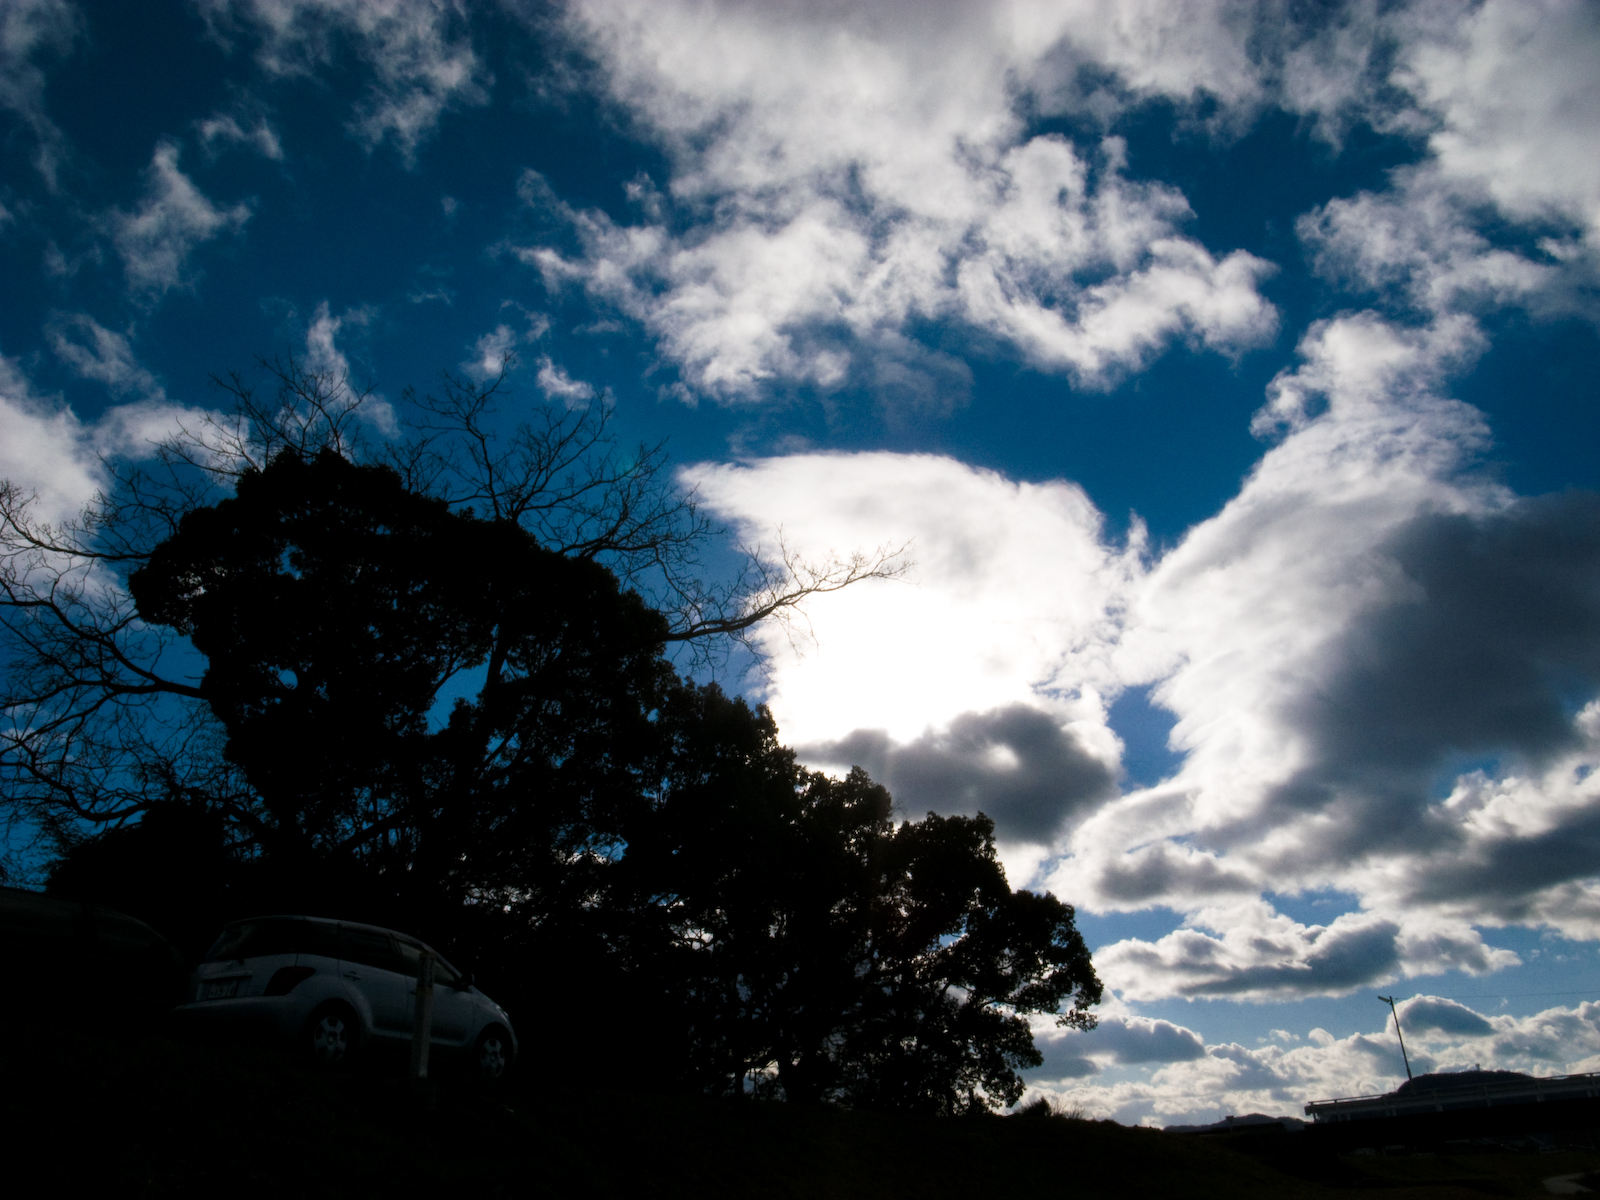 the sky over a group of trees and cars